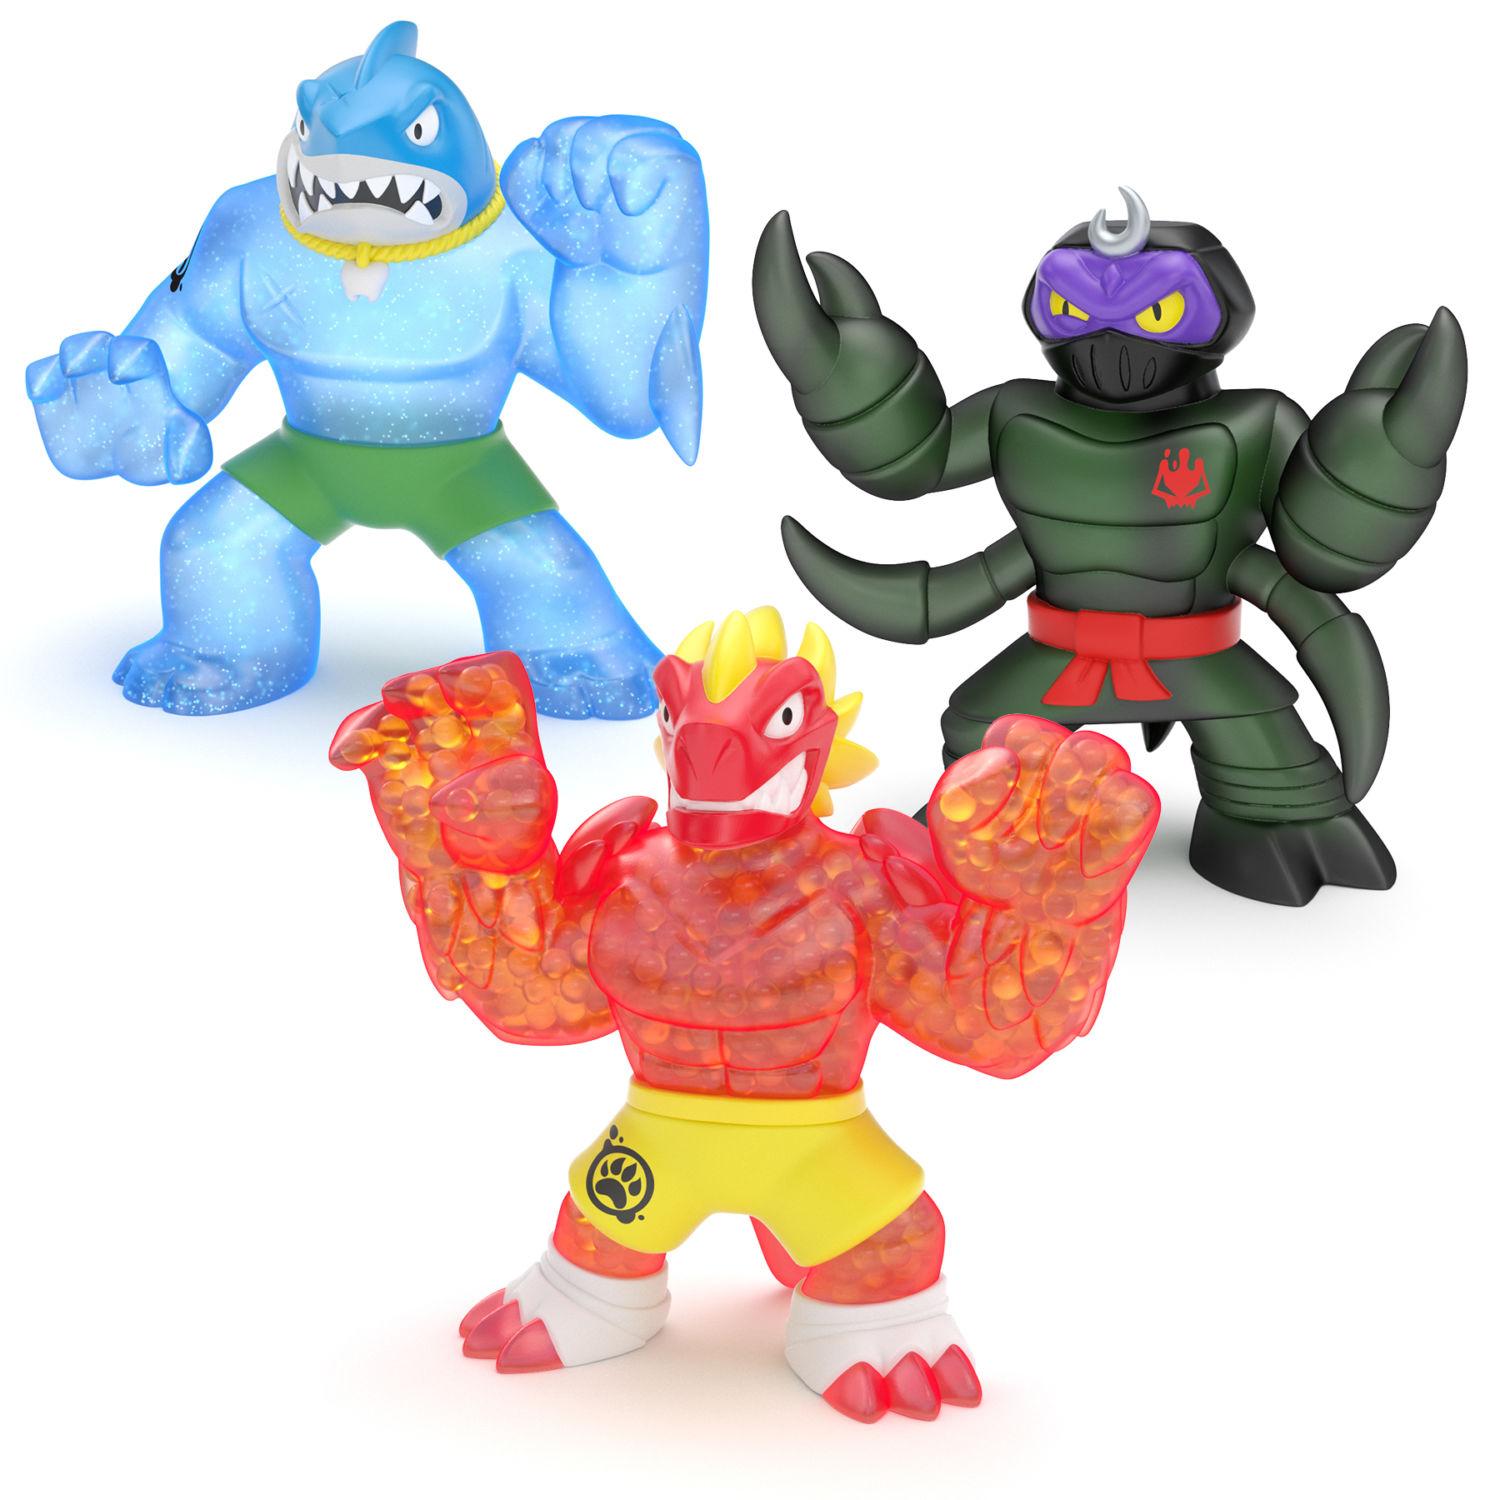 Squish Stretch And Flex With Heroes Of Goo Jit Zu The Toy Insider